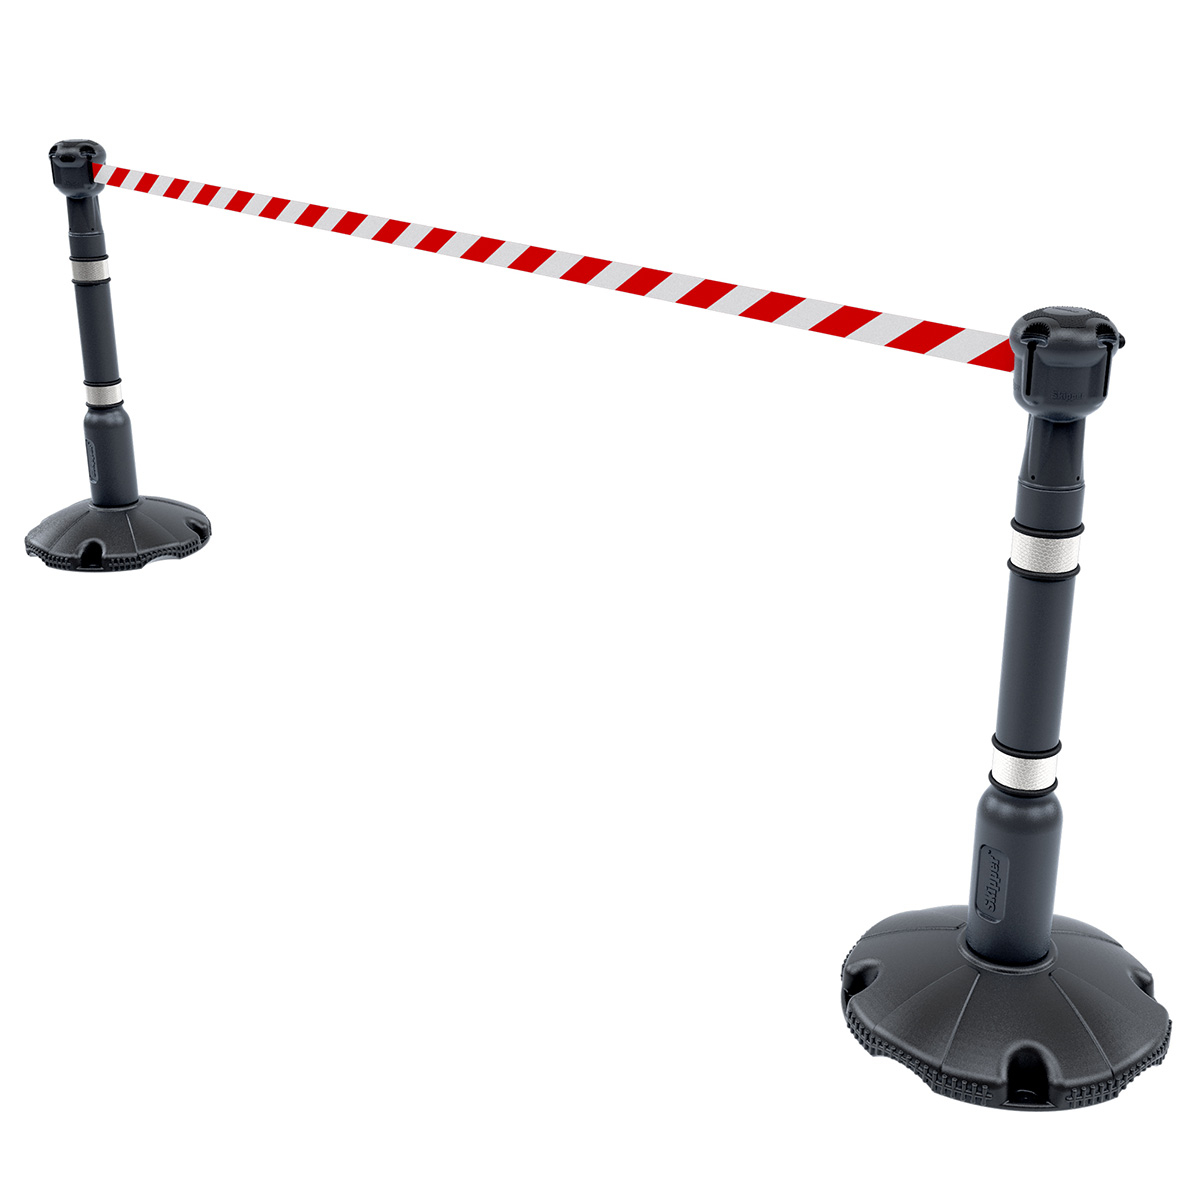 Skipper™ Retractable Barrier Kit 9m is Ideal For Worksites And Roadwork Location